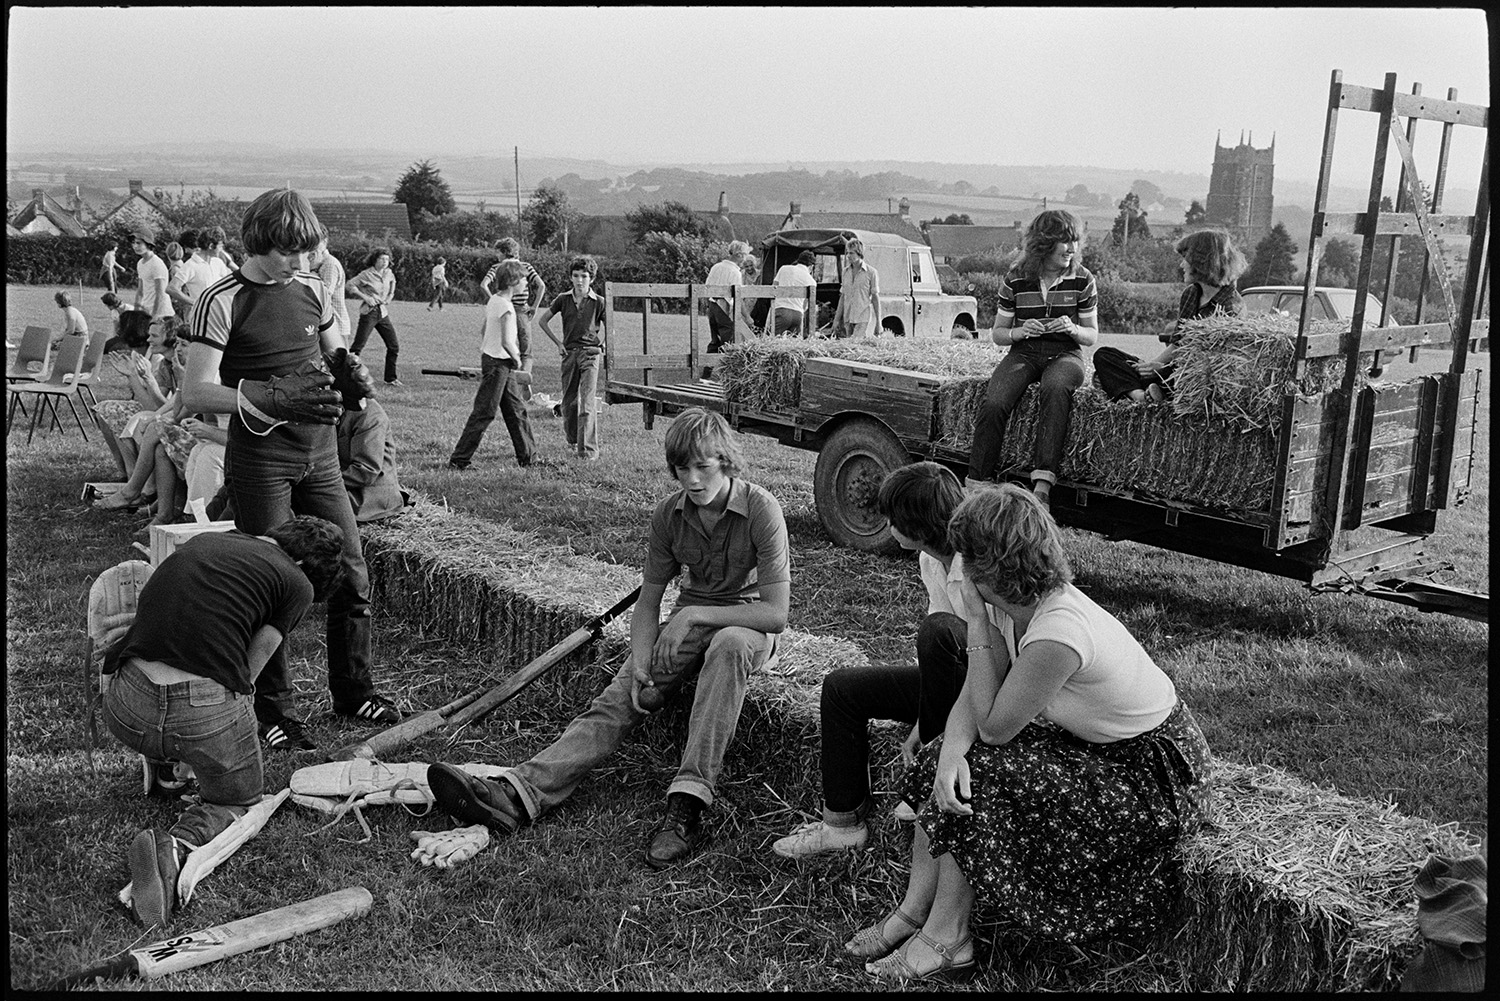 Spectators at cricket match sitting on straw bales, church tower in background, tractors. 
[Teenagers sat on straw bales at a cricket match in a field at Iddesleigh. One man is either putting on or removing knee pads for batting. Two girls are sat on straw bales on a trailer in the background and Iddesleigh church tower can be seen in the distance.]